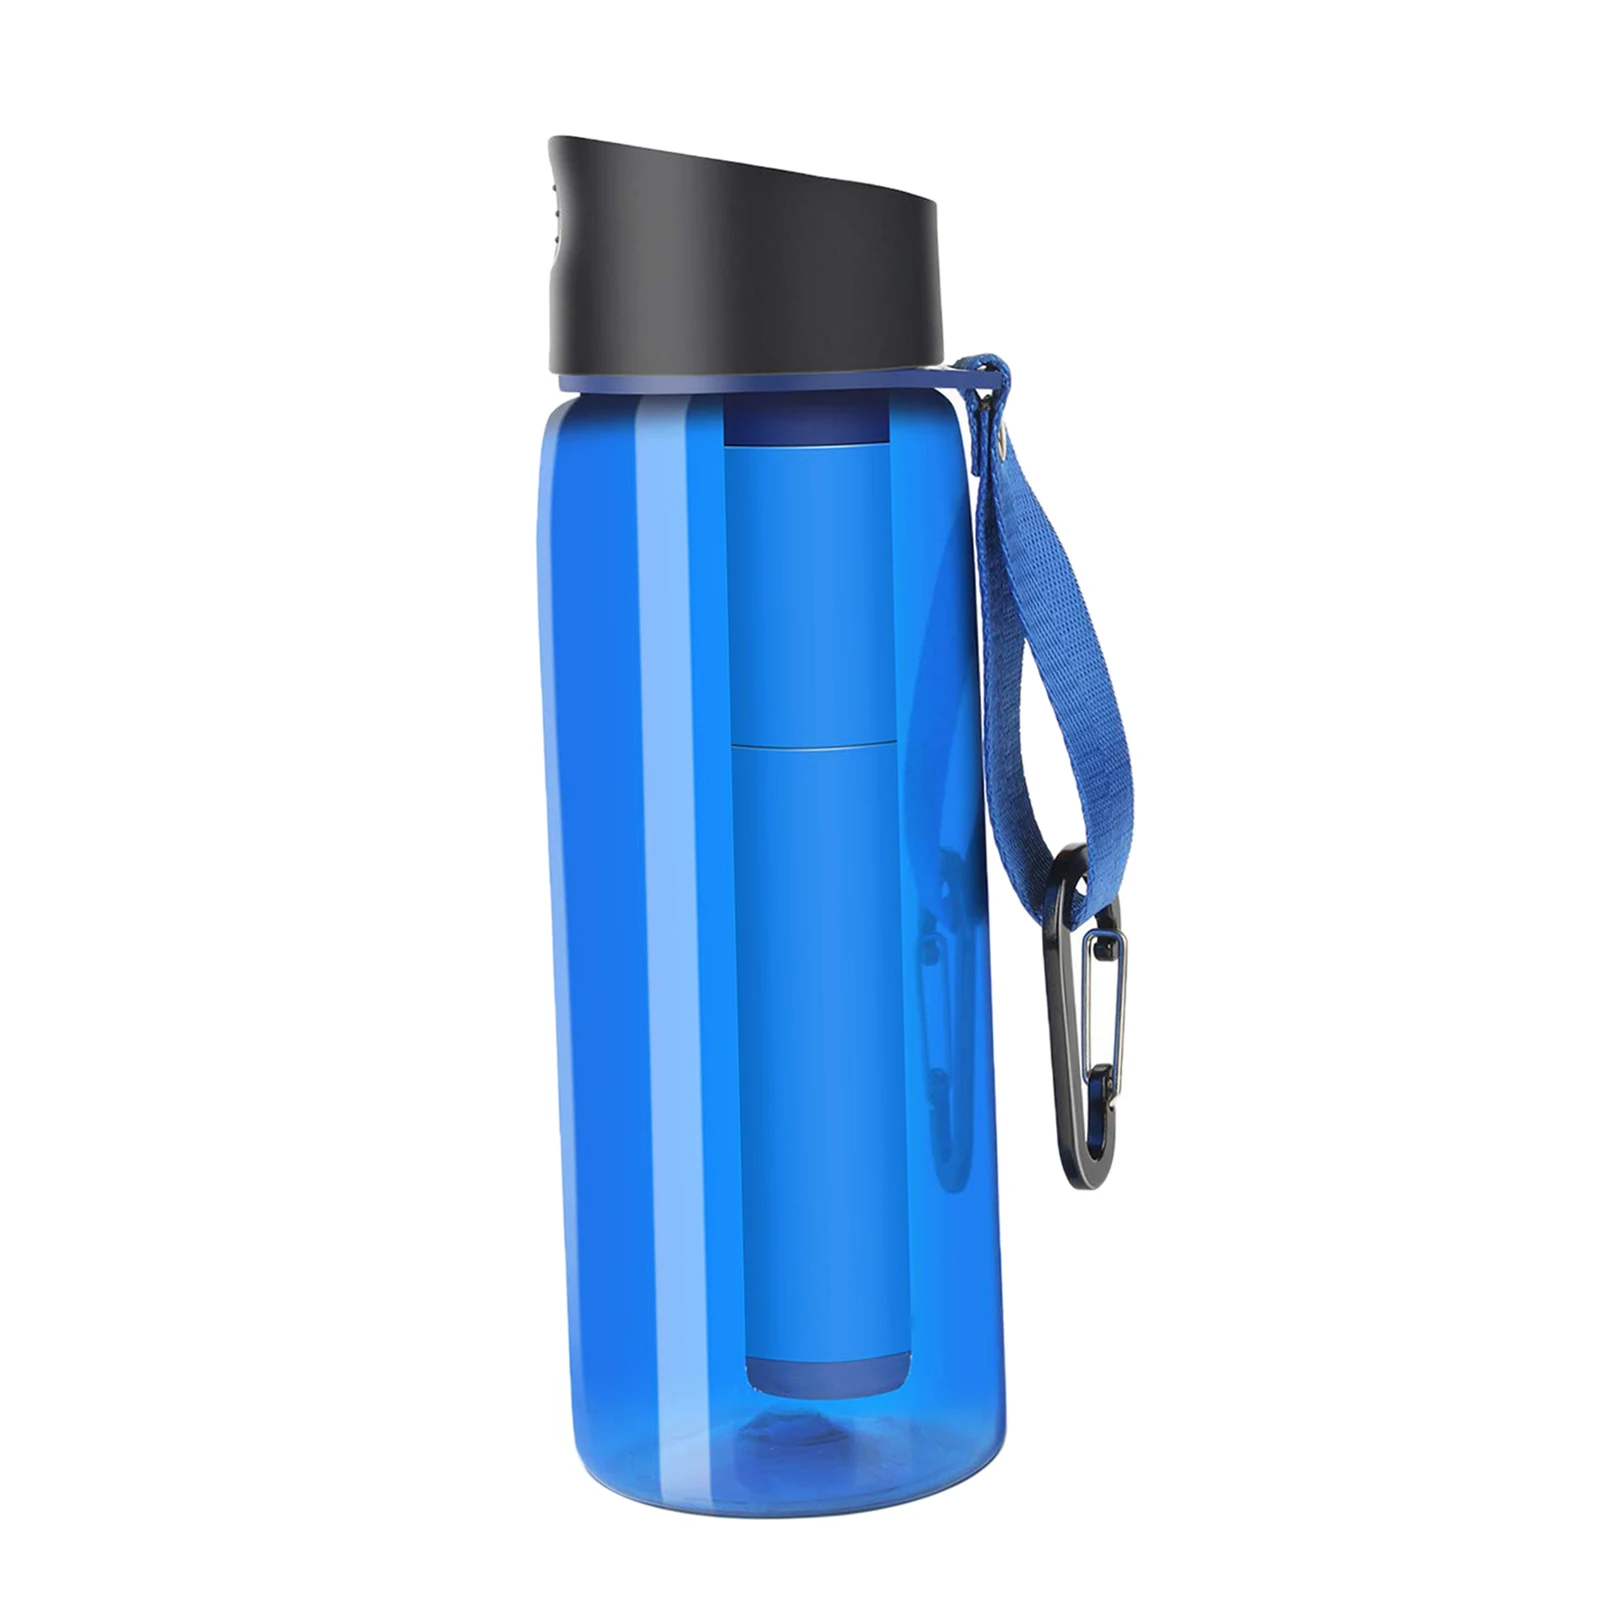 650ml Outdoor Water Filter Bottle Survival Camping Water Filtration Bottle Straw Purifier for Camping Hiking Traveling 22oz